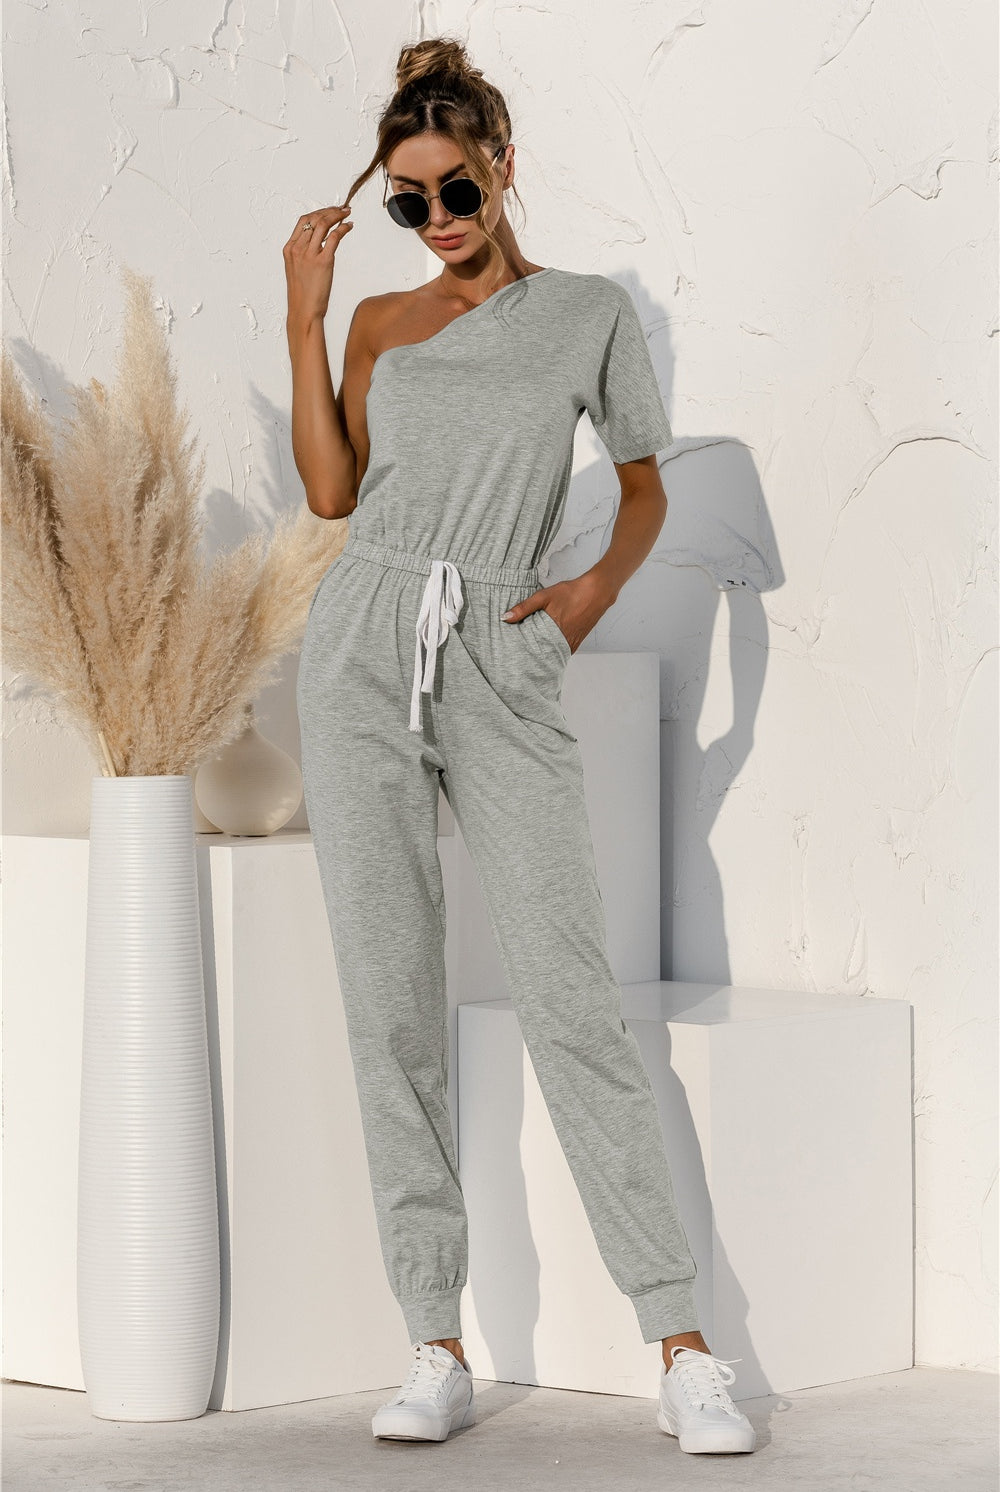 A model poses confidently in a one-shoulder jumpsuit with a drawstring waist, paired with classic white sneakers, ready for a relaxed yet fashionable day out.